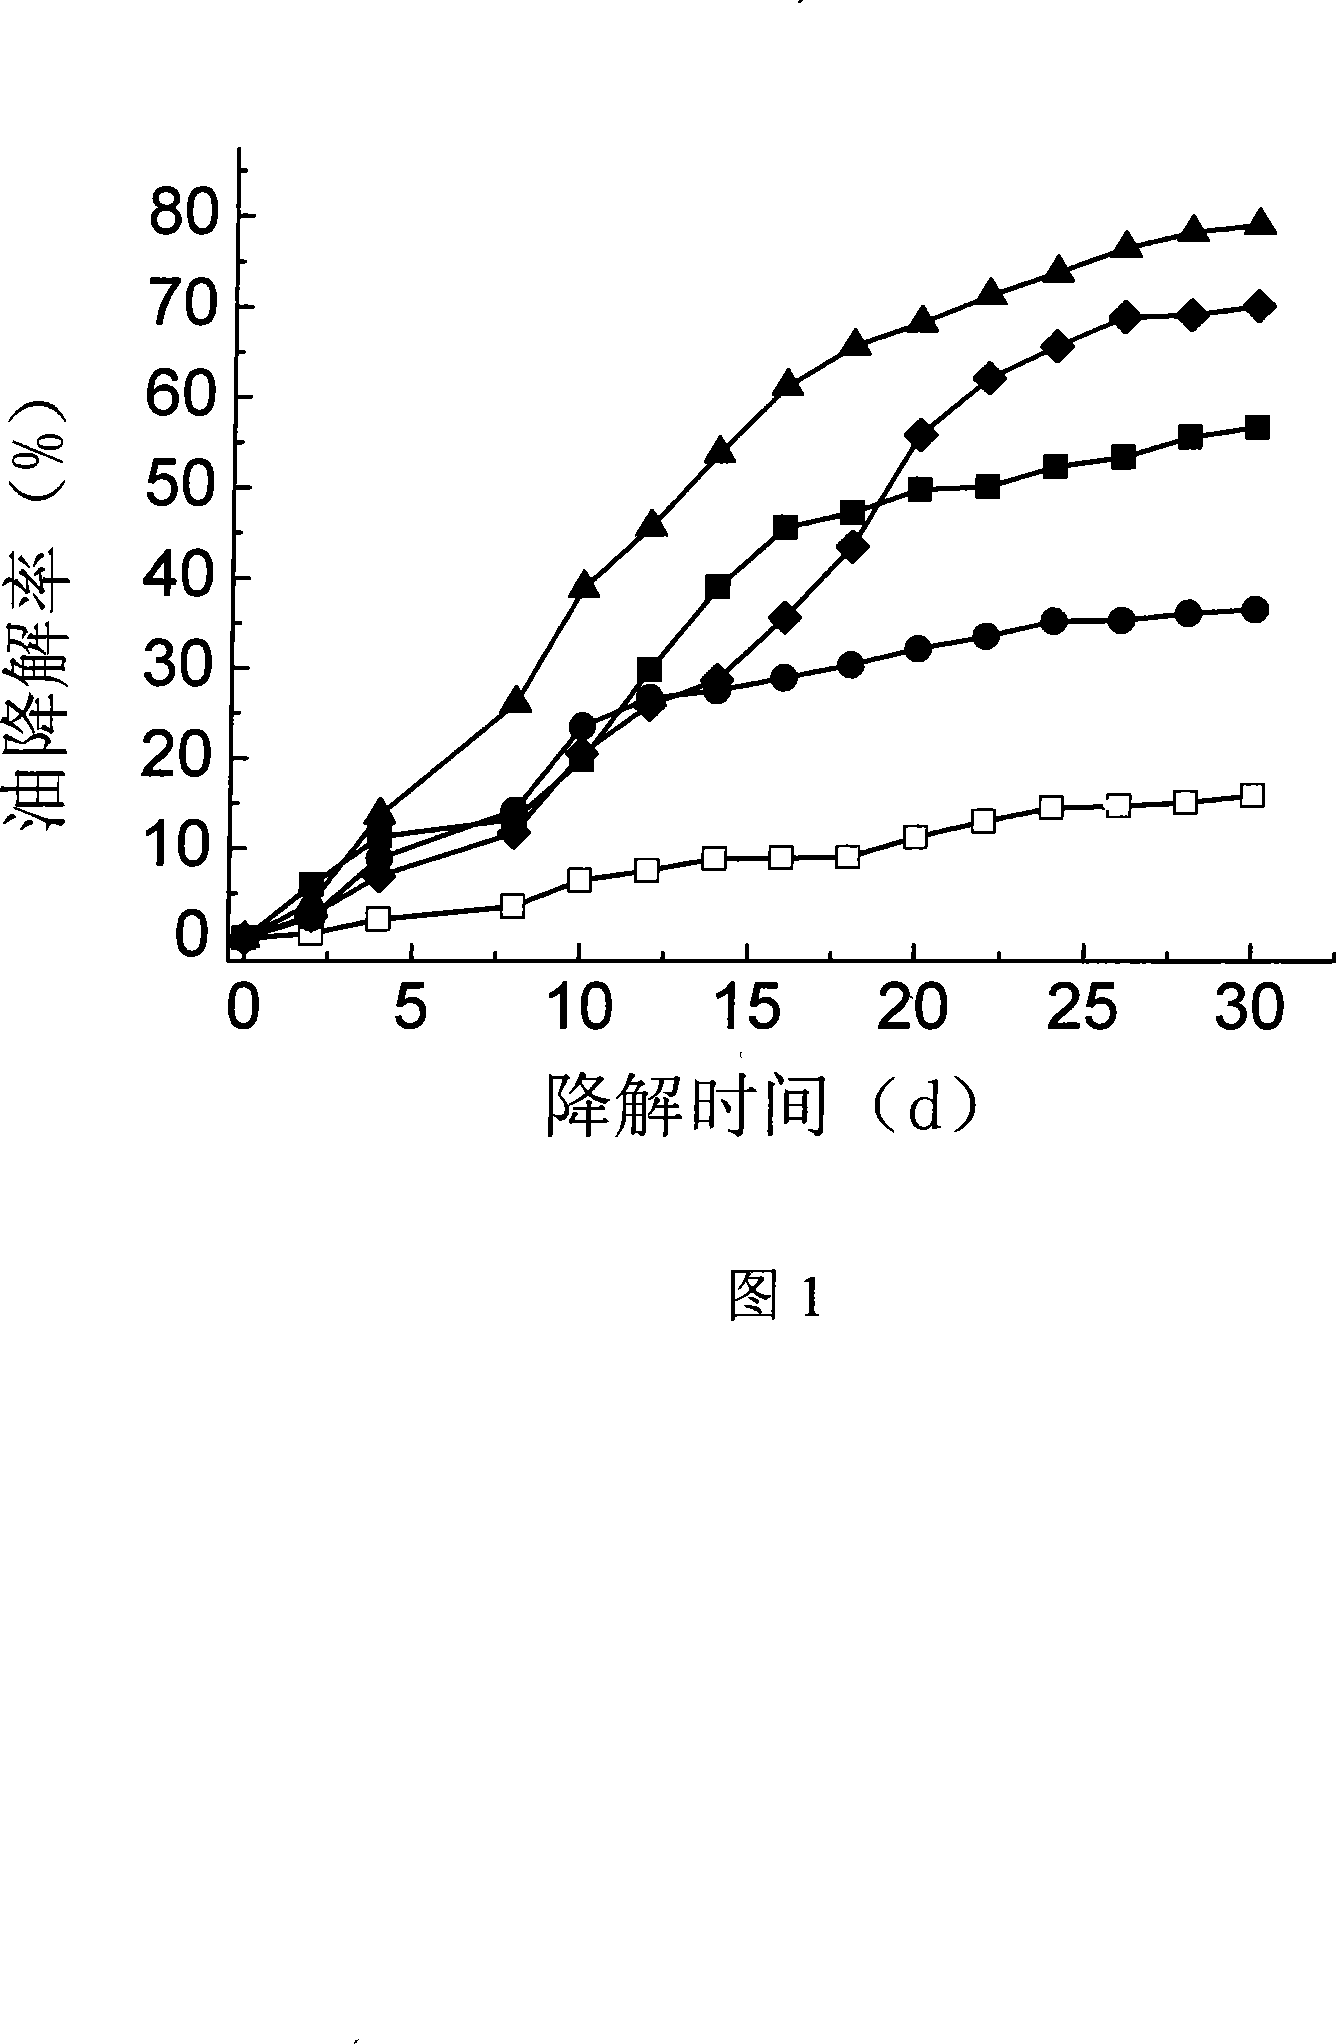 Lipophilic controlled release fertilizer for bioremediation of oil pollution environment and preparation method thereof